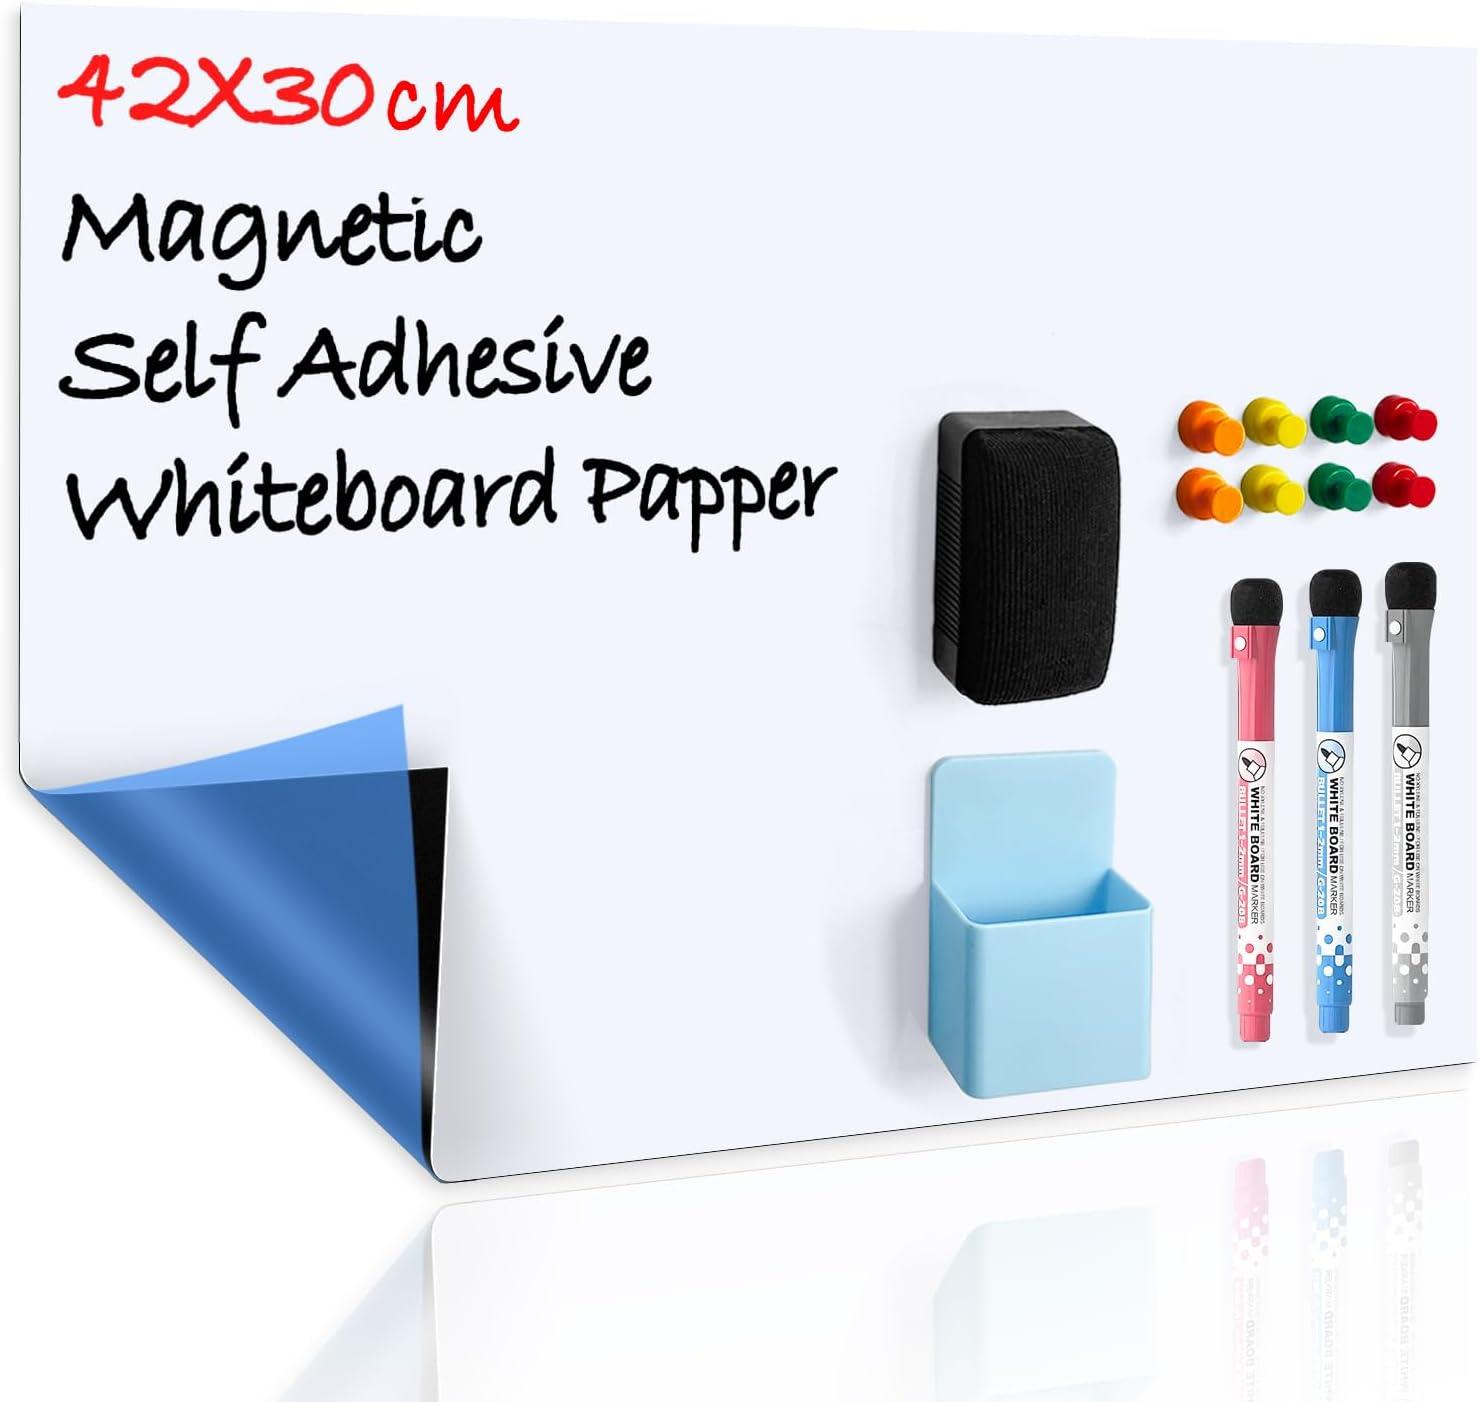 cuhioy whiteboard magnetic dry wipe board self adhesive a3 for any smooth surface with new stain resistant